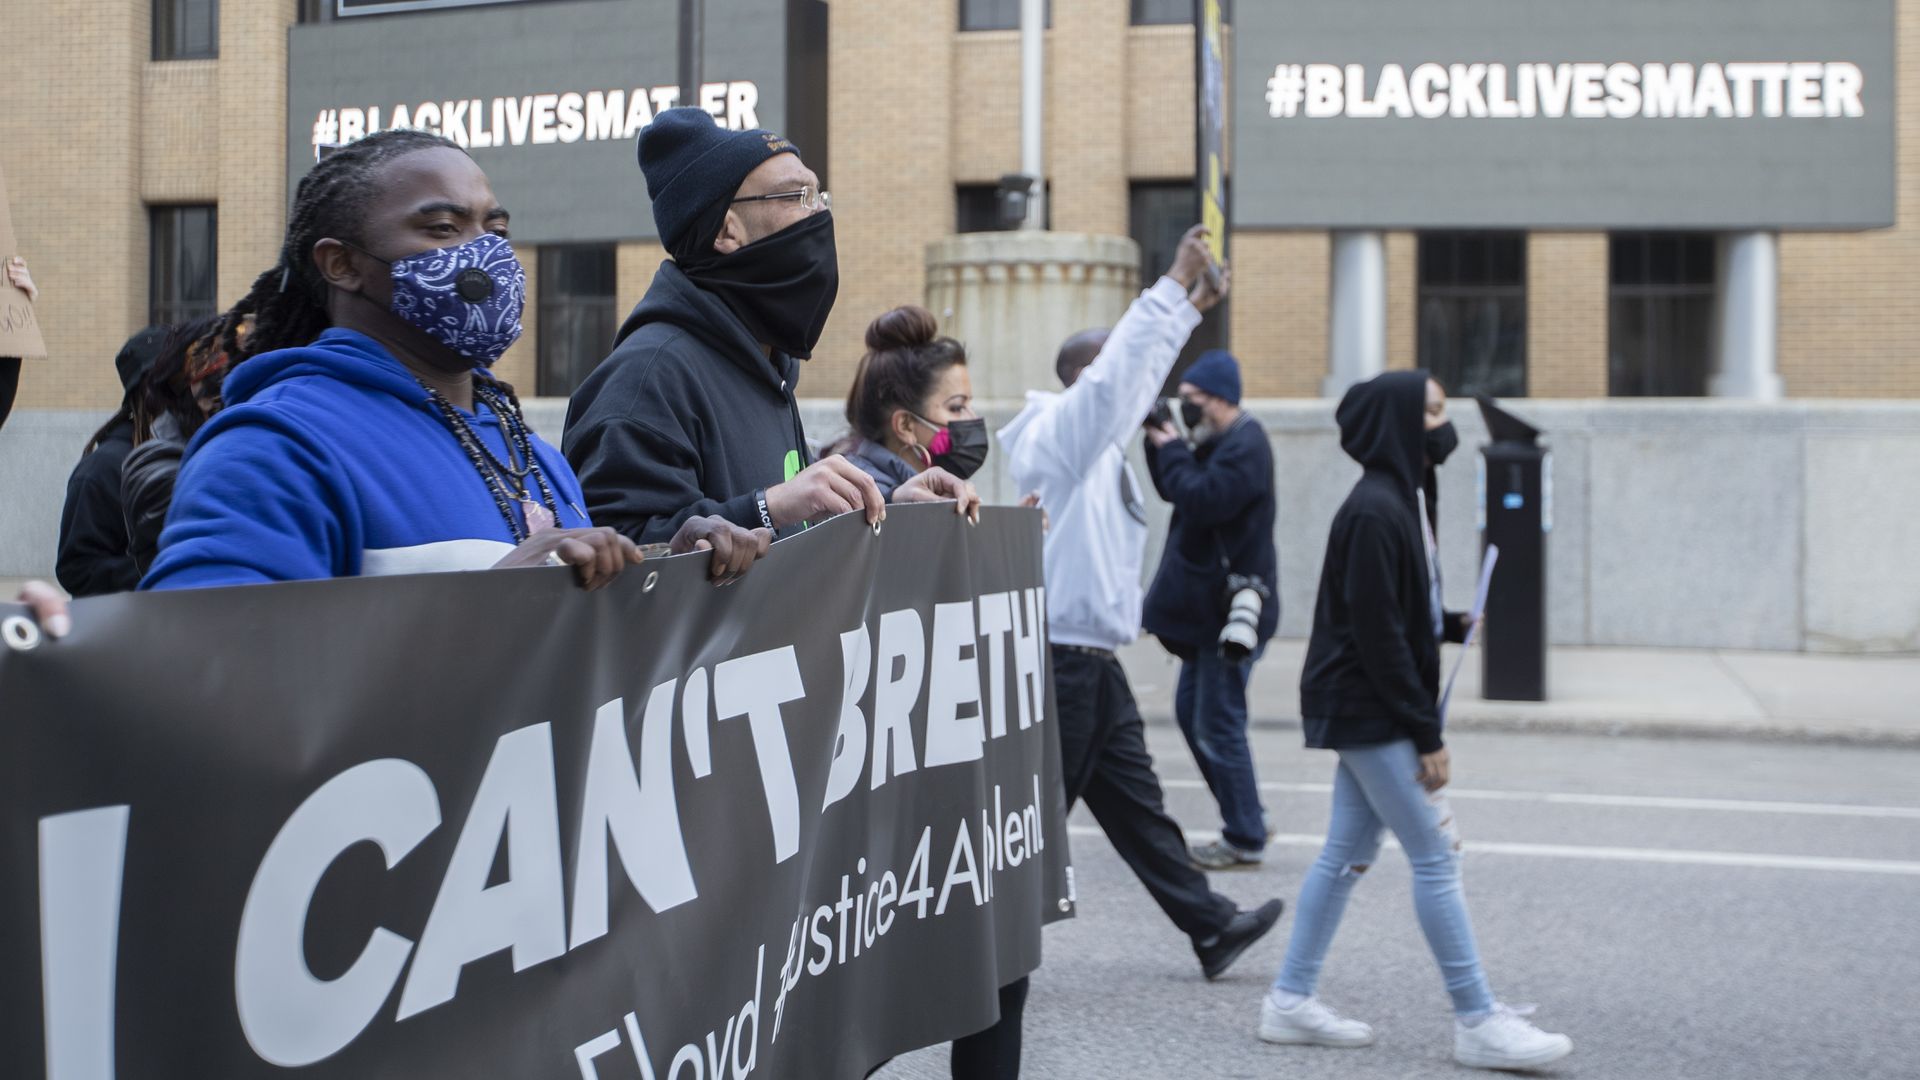 Photo of protesters holding a banner that says "I can't breathe" as they walk on a street 